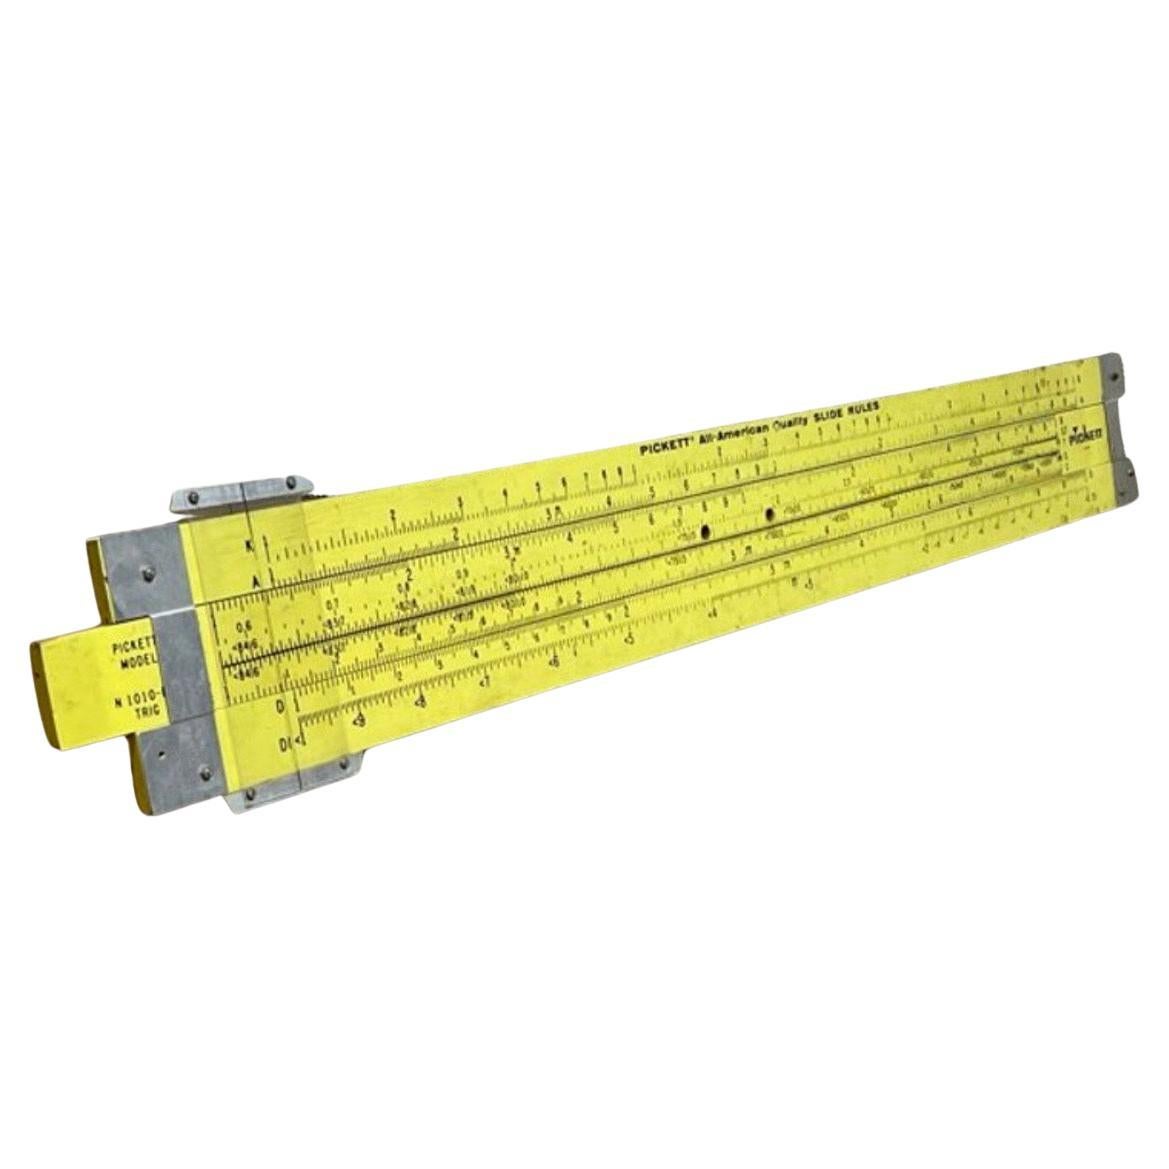 Unique Vintage Oversized 7' Industrial Slide Rule by Pickett For Sale